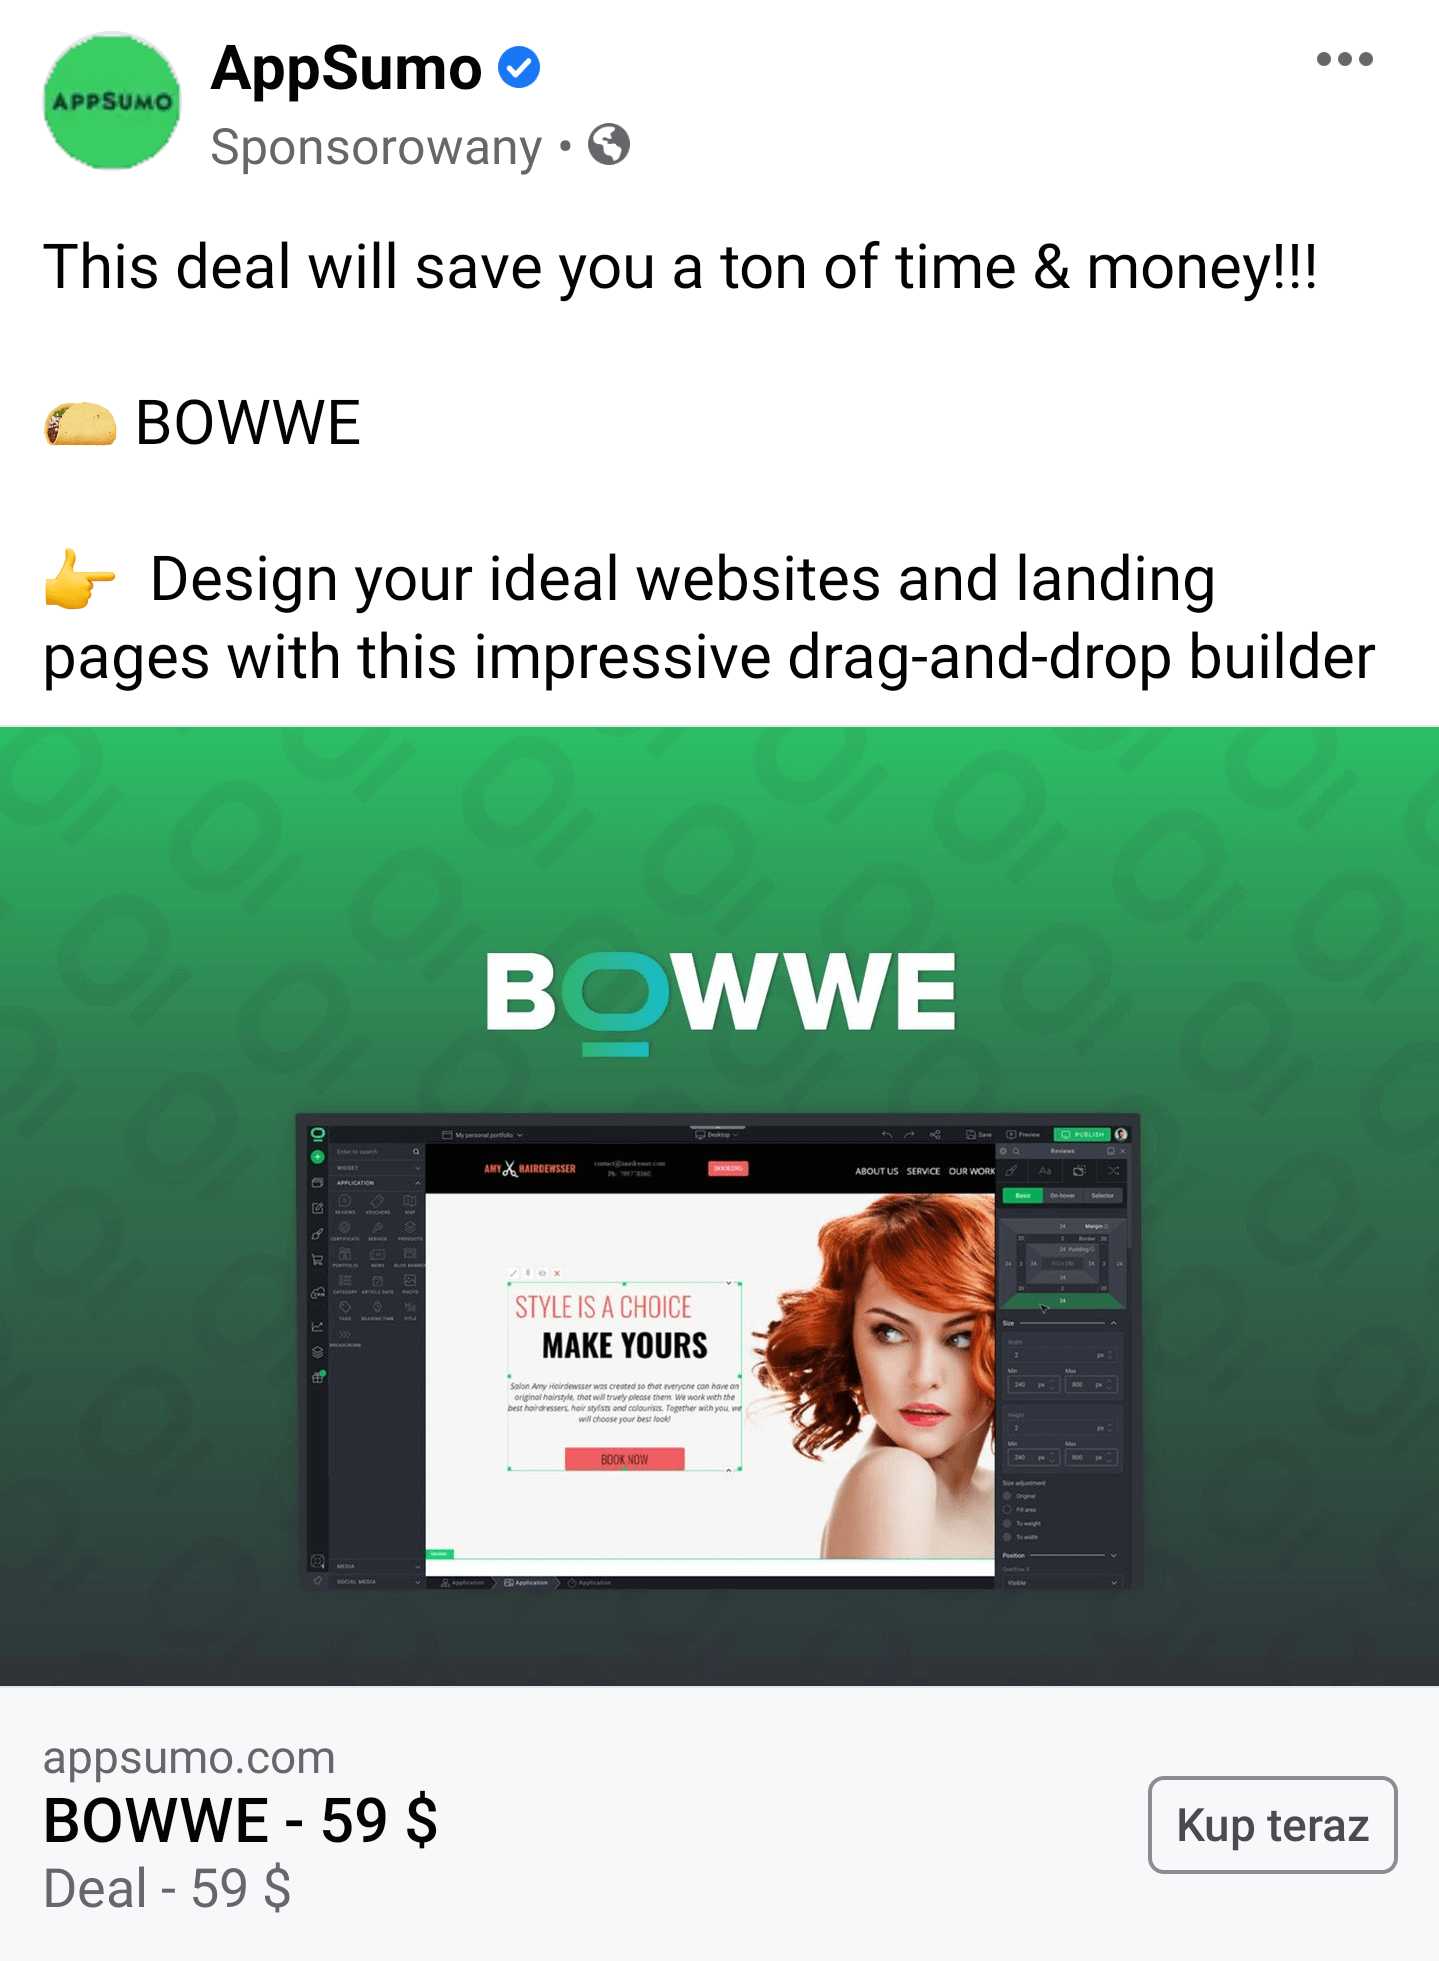 BOWWE advertisement during the Appsumo campaign2